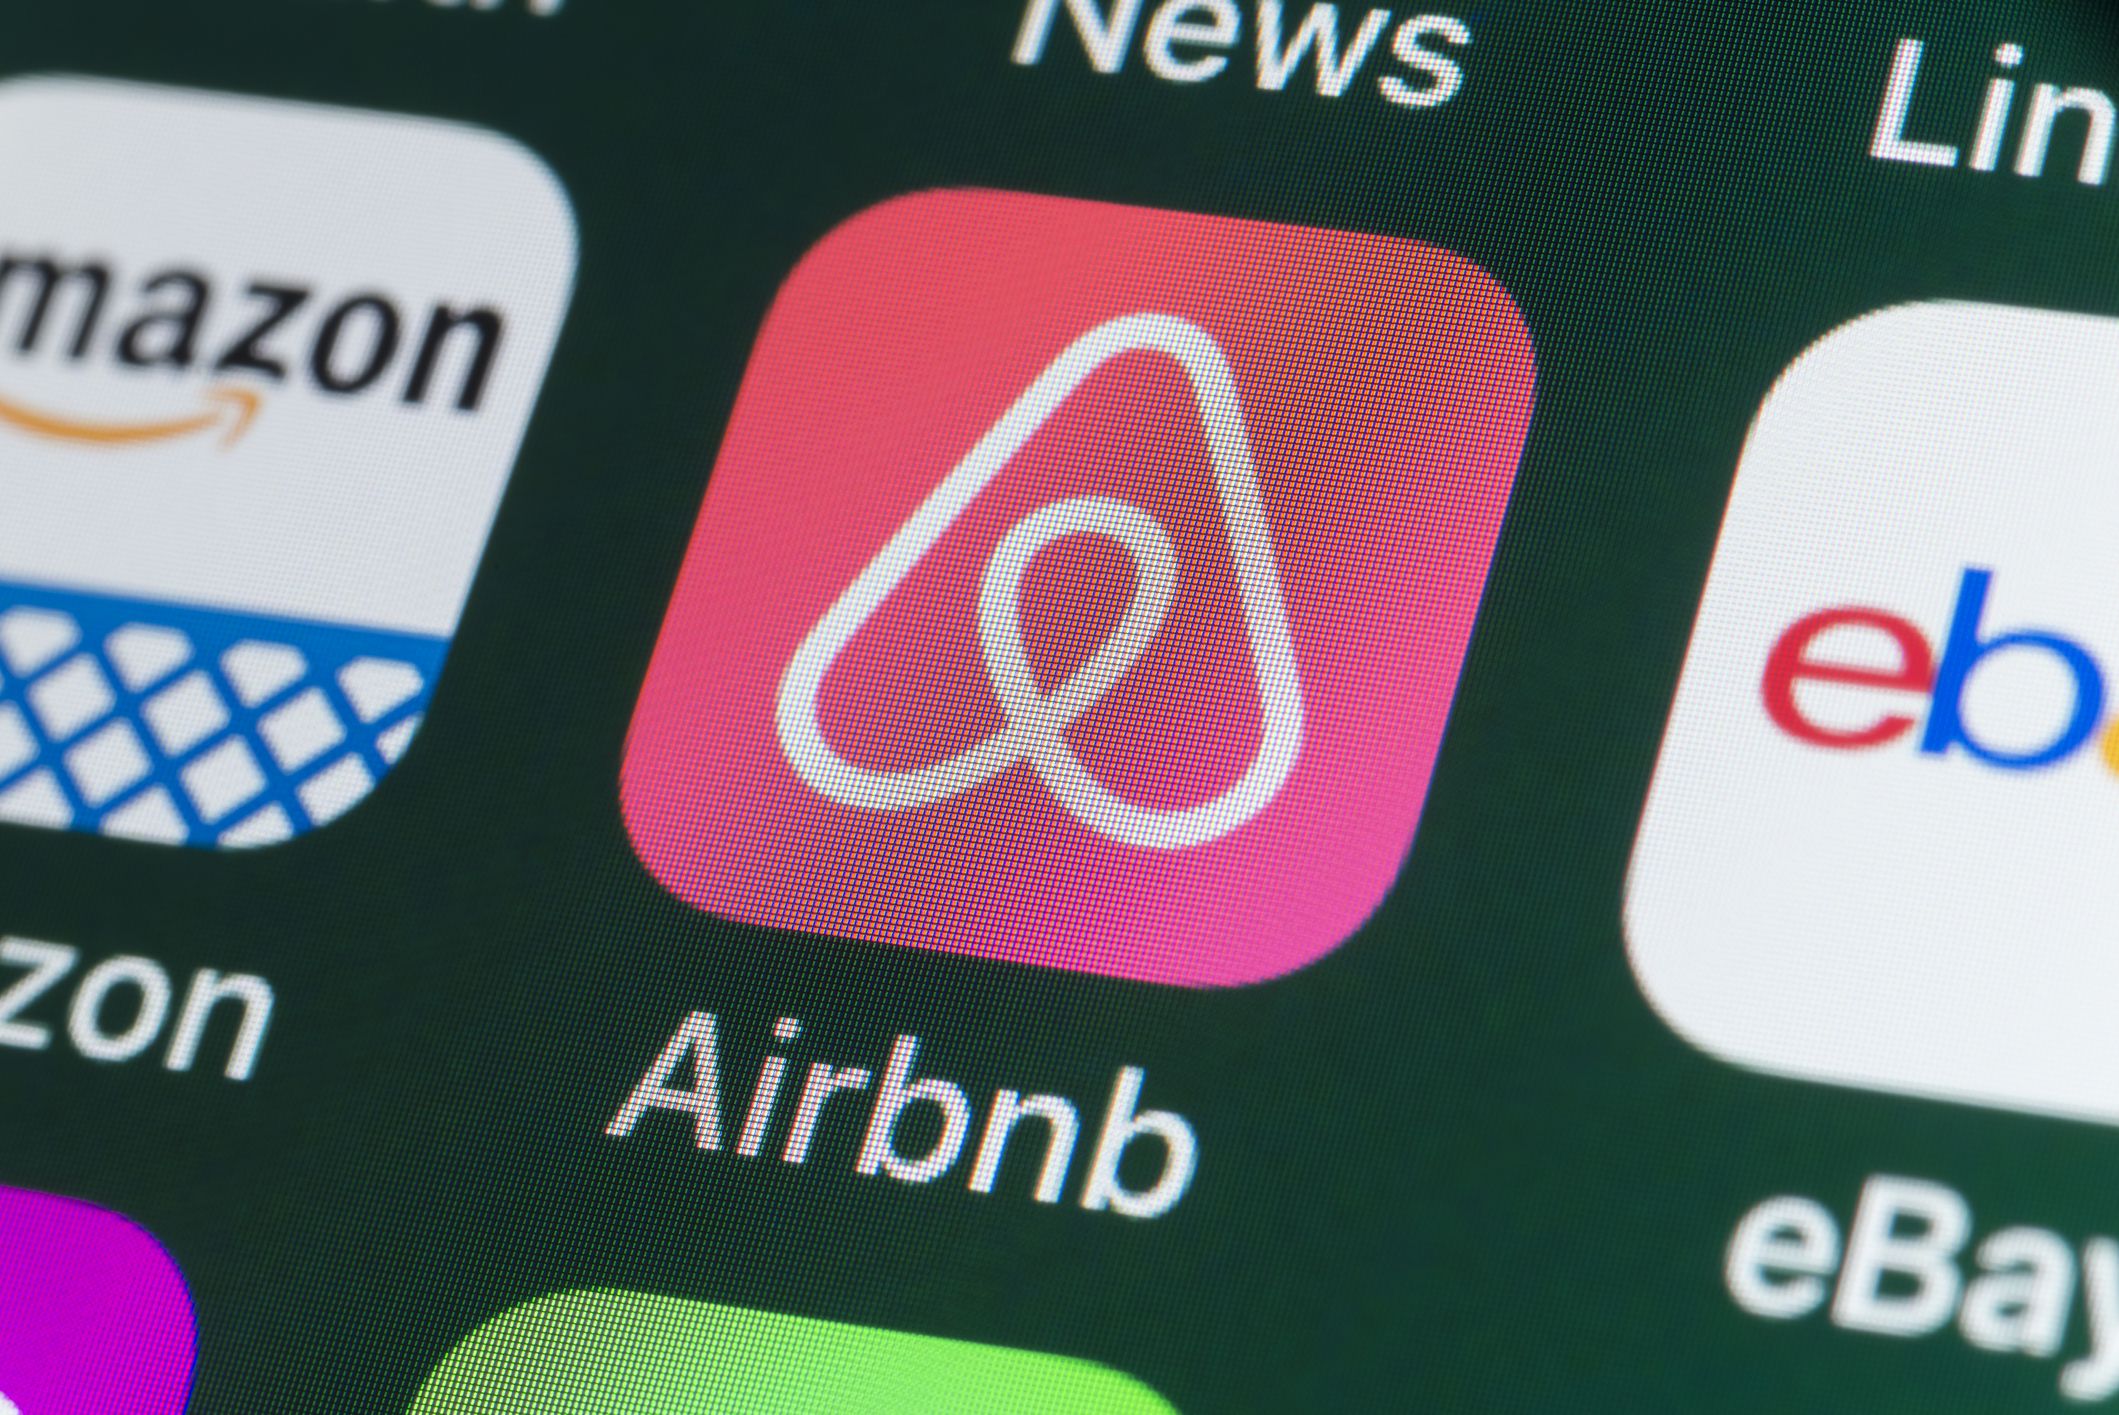 <p>Airbnb has suspended operations in both Russia and Belarus. But perhaps more significantly, it is supporting Ukrainian refugees by <a href="https://www.thrillist.com/news/nation/airbnb-suspends-operations-russia-belarus-free-housing-refugees">providing short-term housing</a> for those in need free of charge.</p><p><b>Related:</b> <a href="https://blog.cheapism.com/are-home-shares-cheaper-than-hotels/">Are Airbnbs Really Cheaper Than Hotels?</a></p>